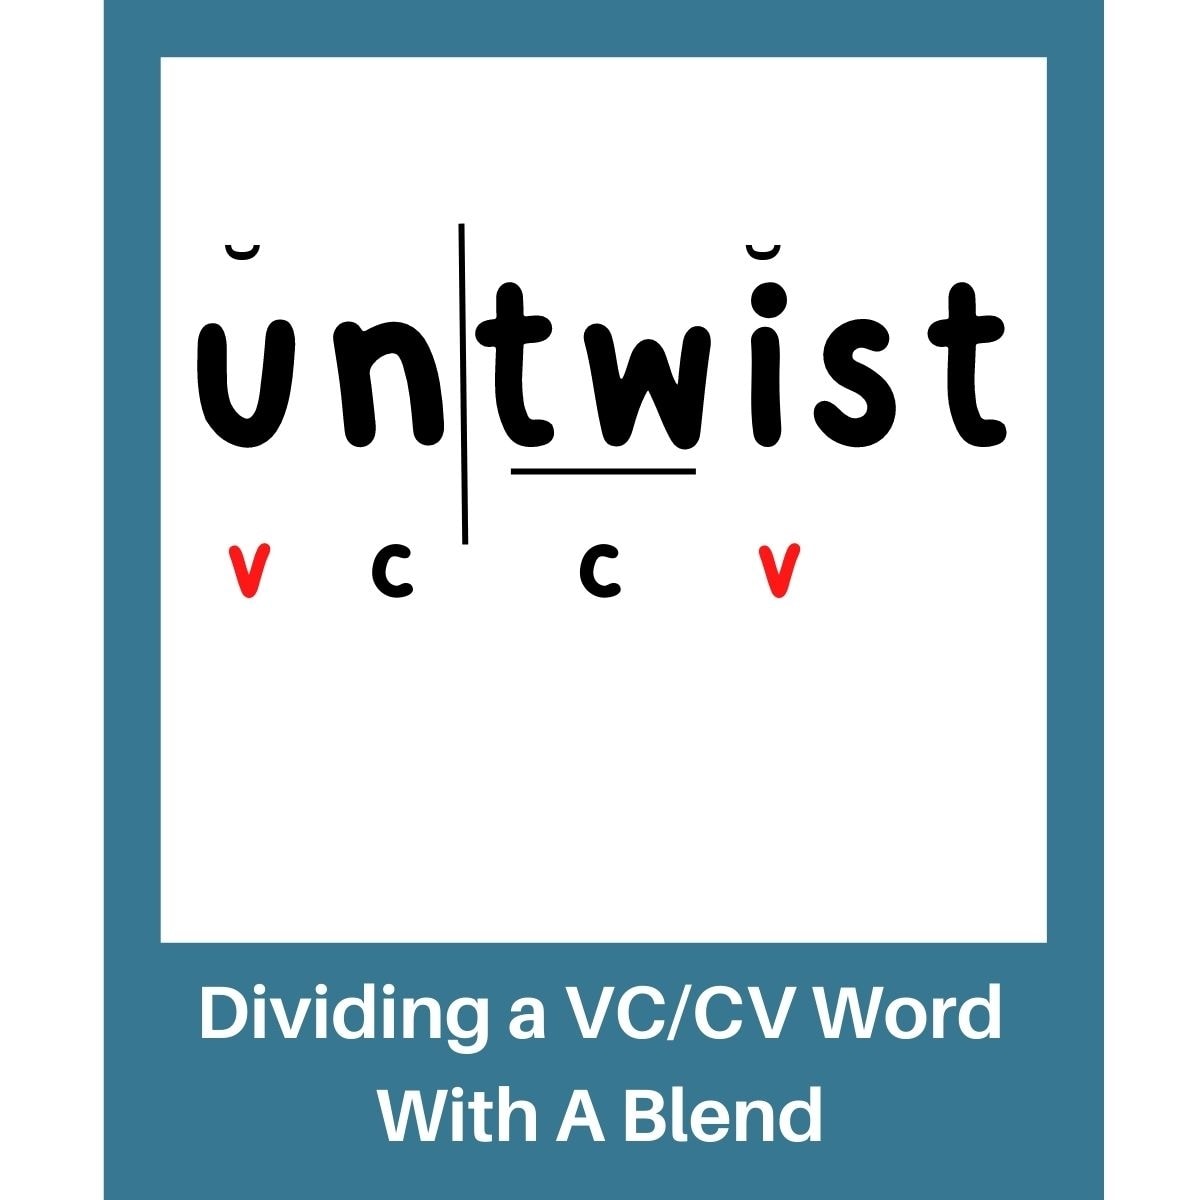 Sample word 'untwist' divided into syllables and marked with V,C,C,V and breve marks.